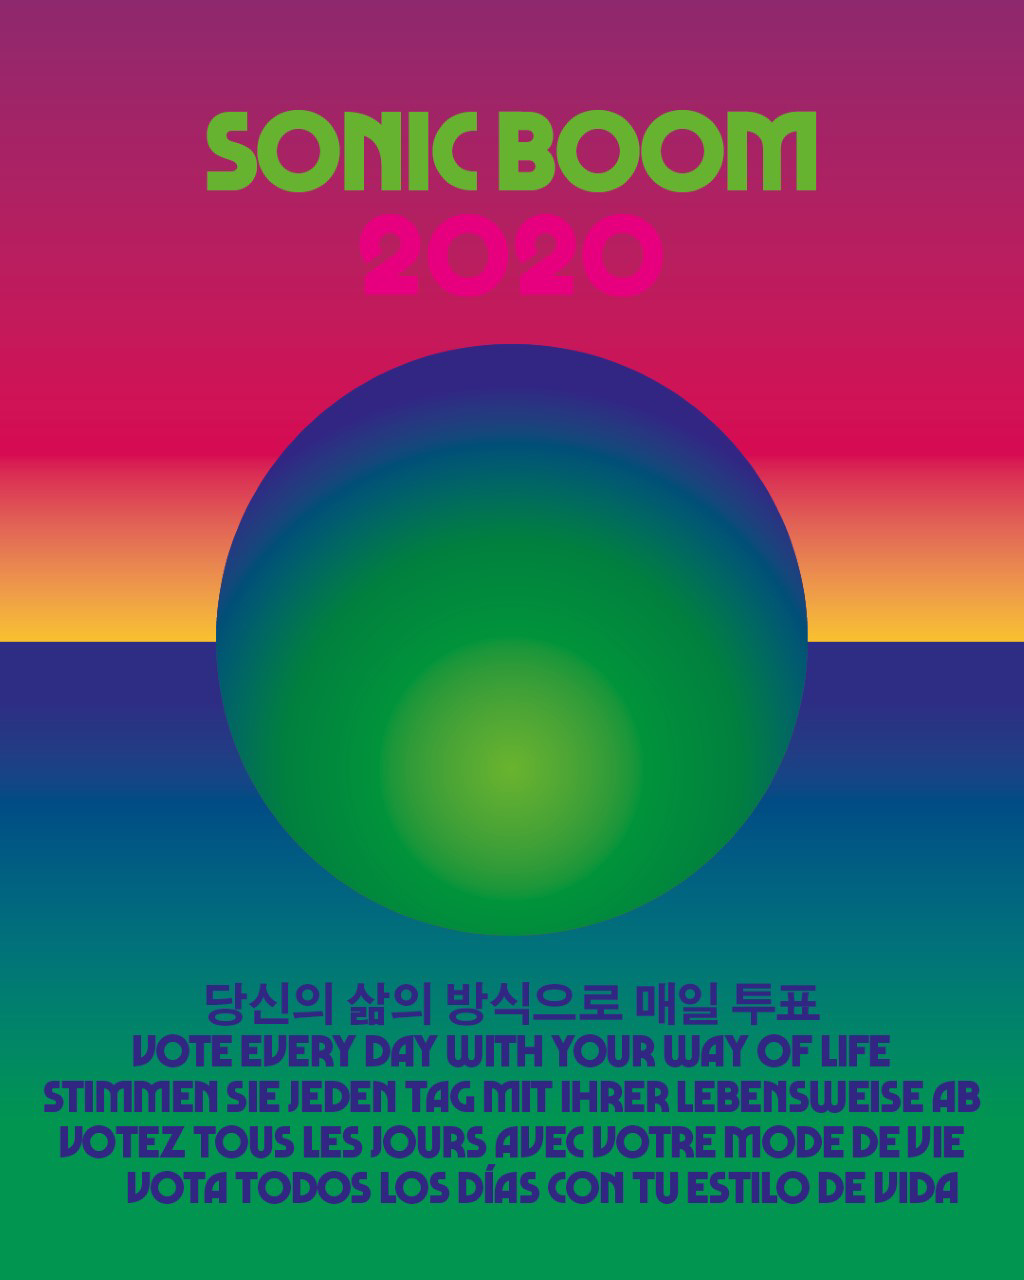 Sonic Boom 2020. Vote every day with your way of life.